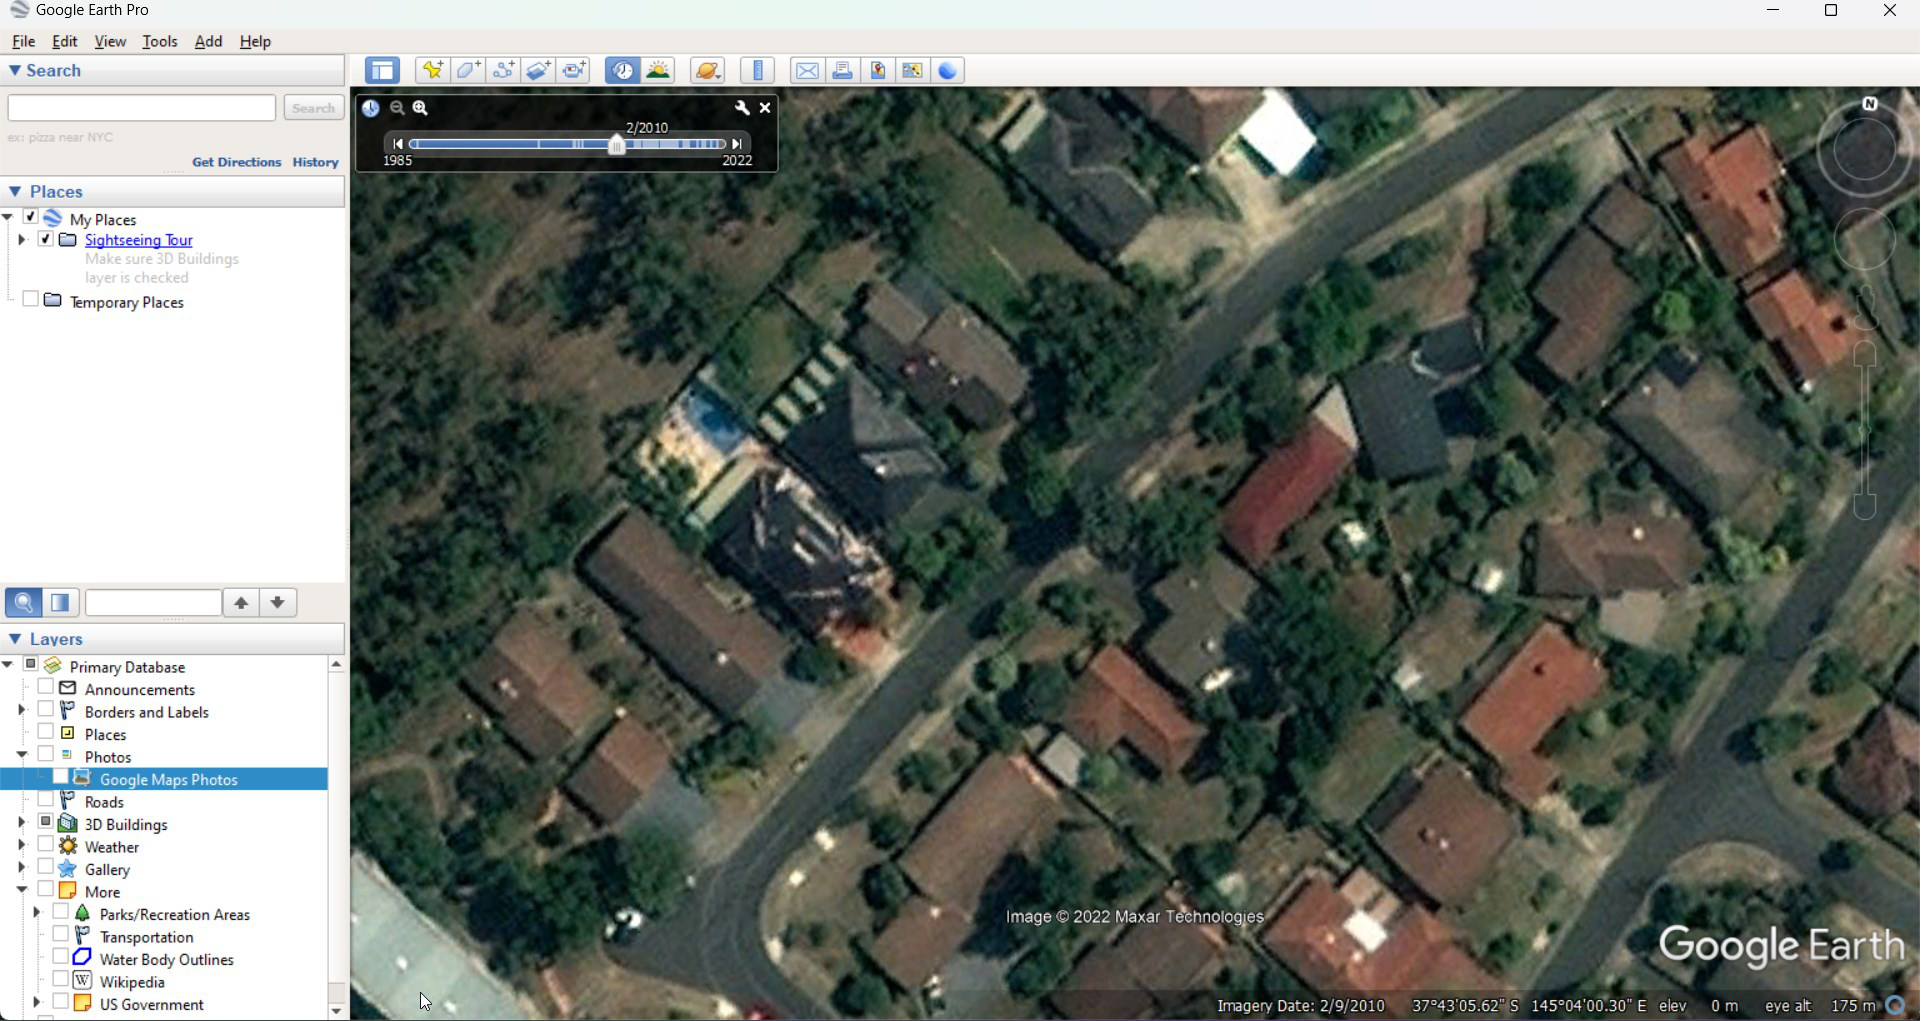 Screen capture of Google Earth software showing the quality of images.